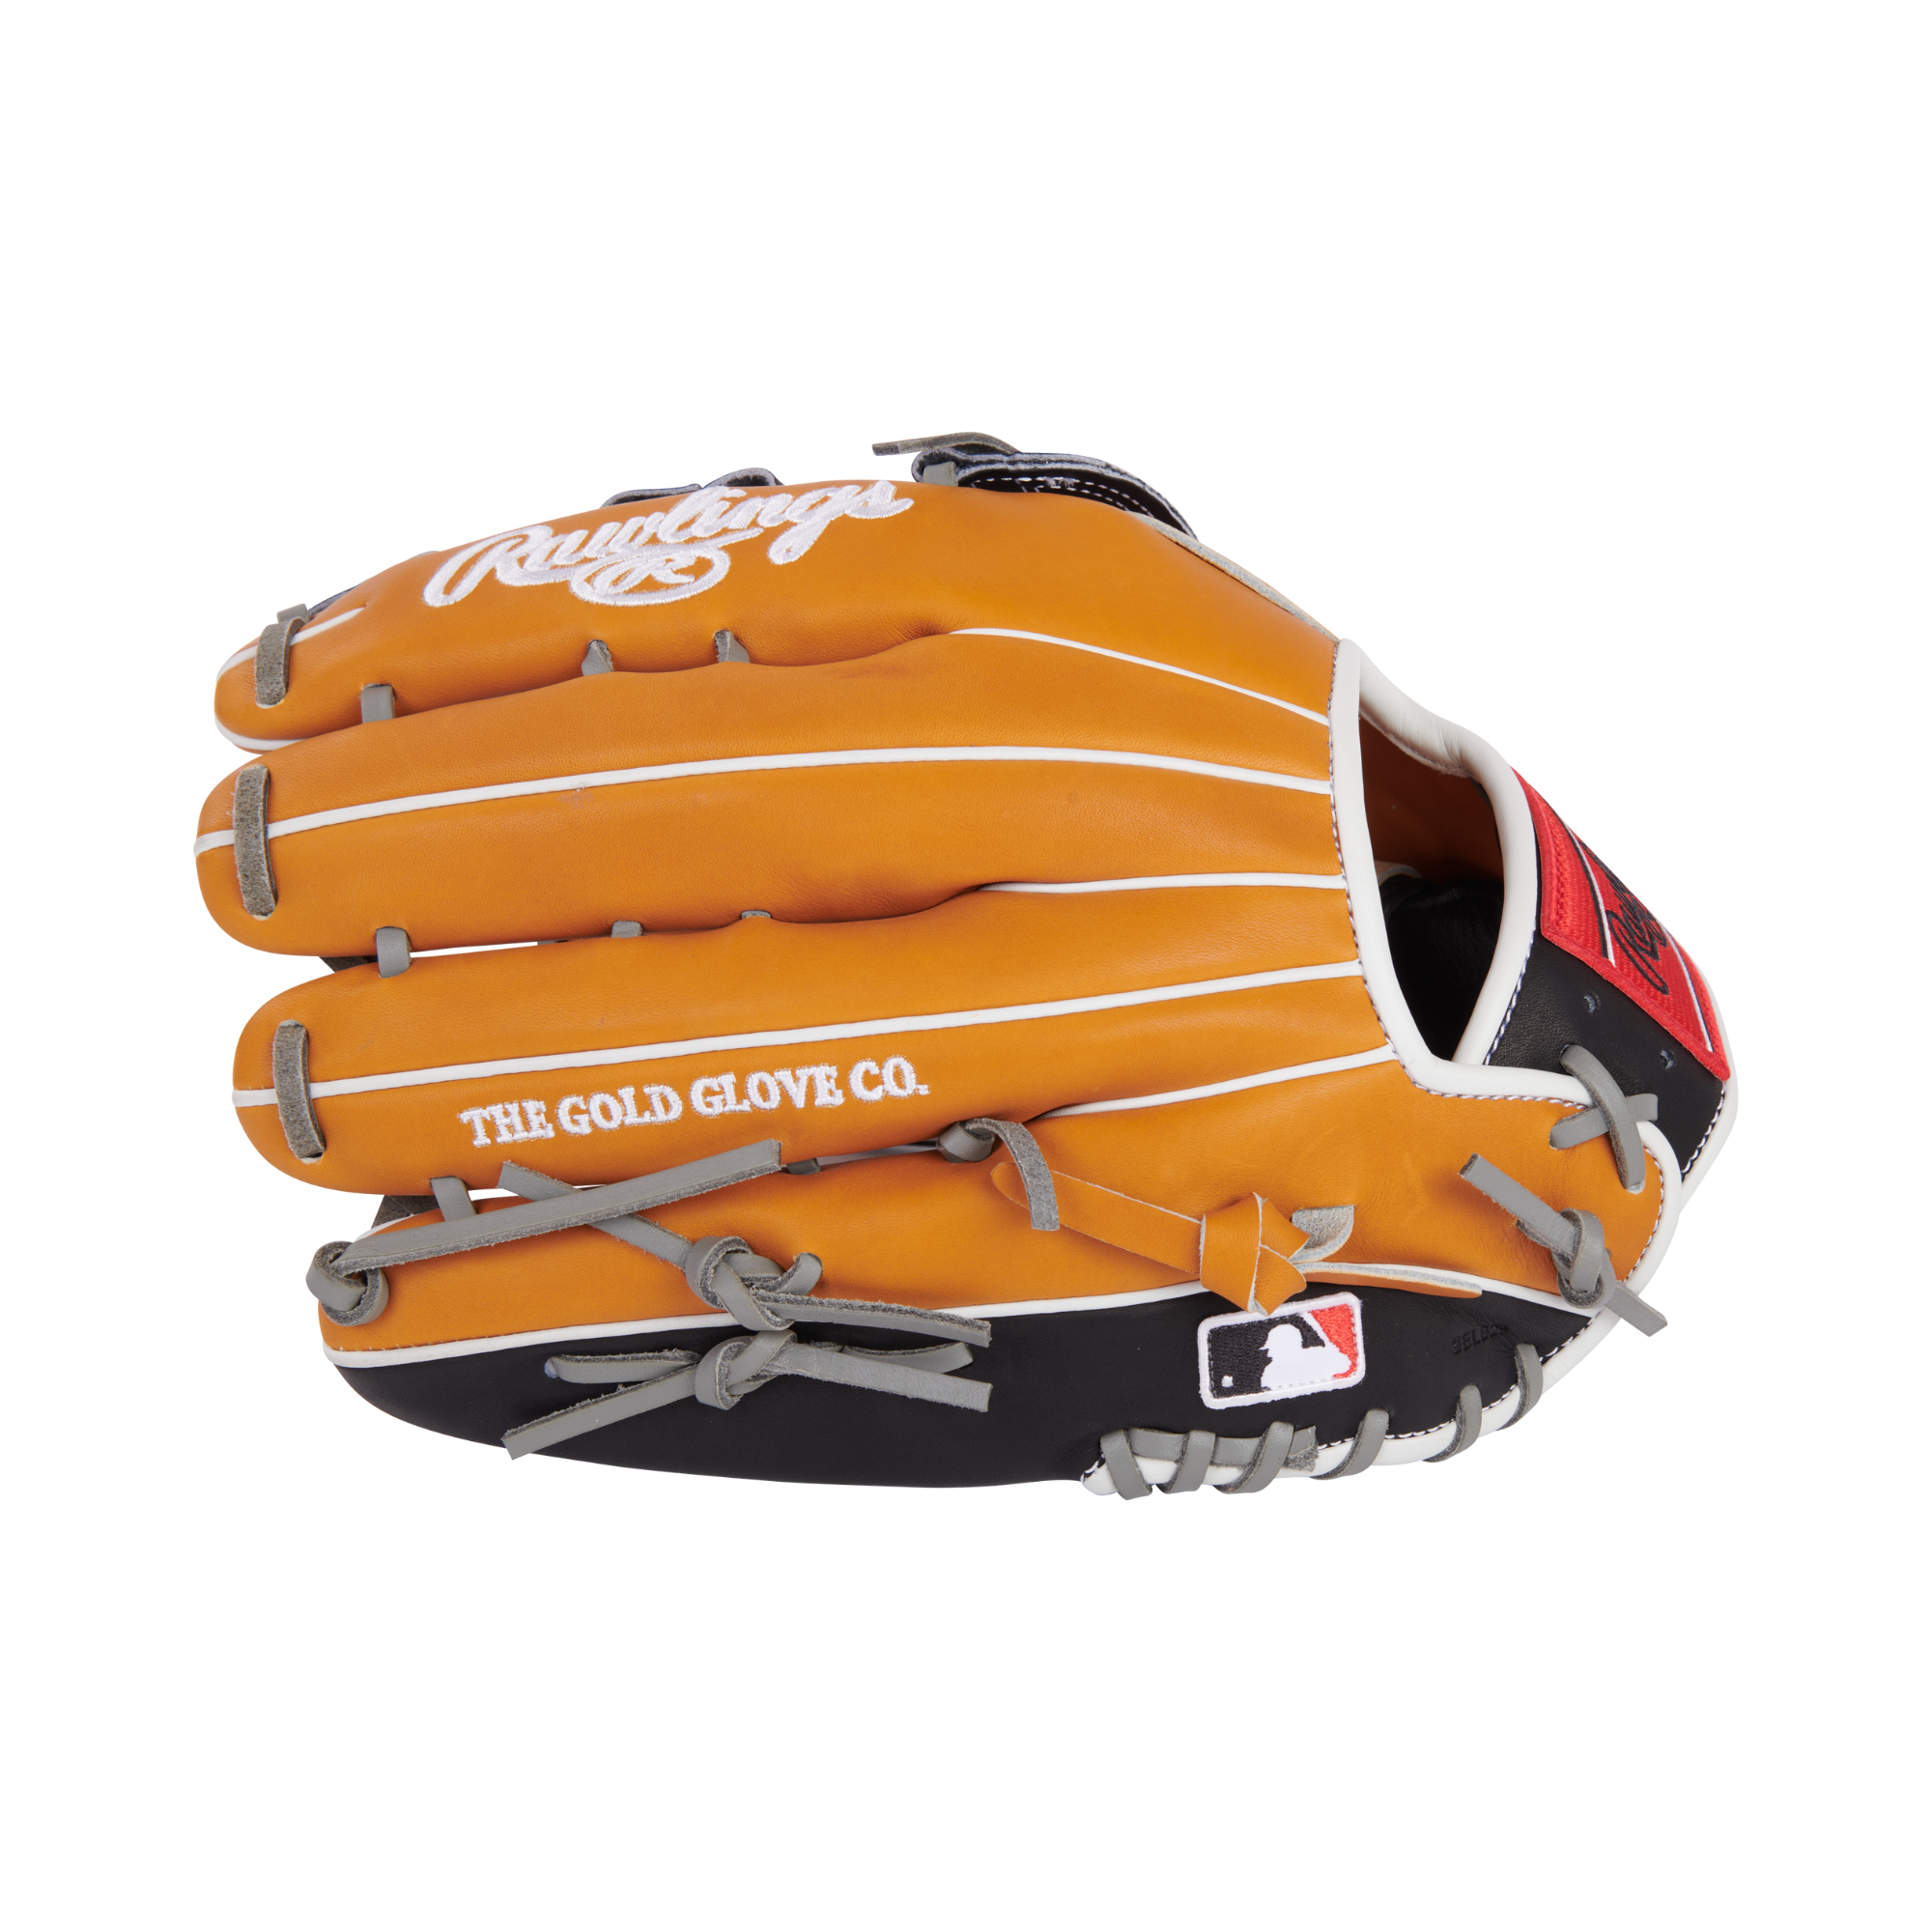 Rawlings August 2022 Gold Glove Club (GOTM) 12.75 inch Outfield Heart of the Hide